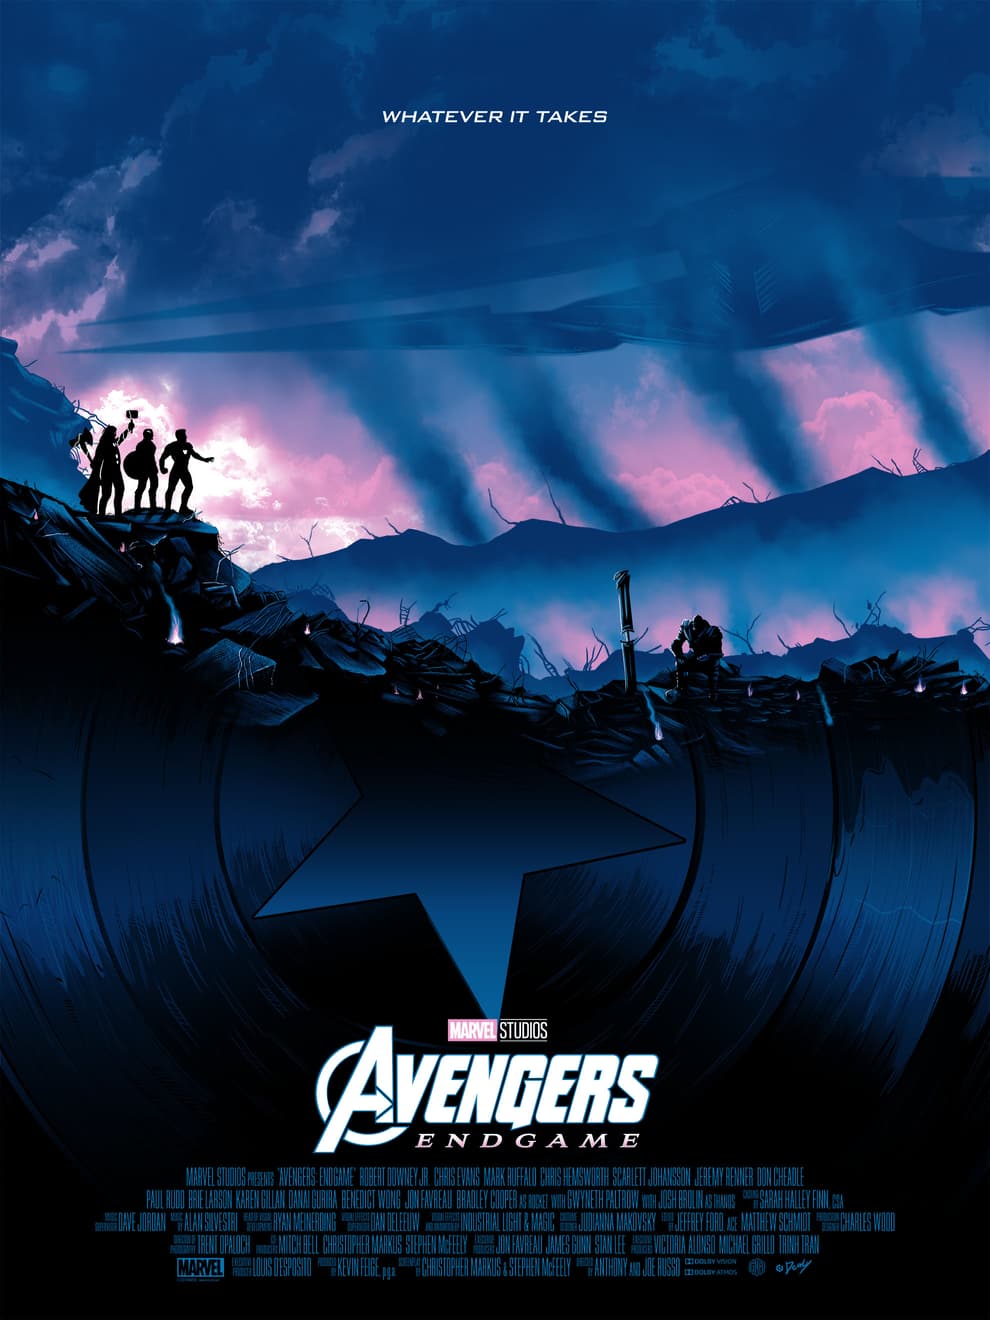 Avengers Endgame by Doaly